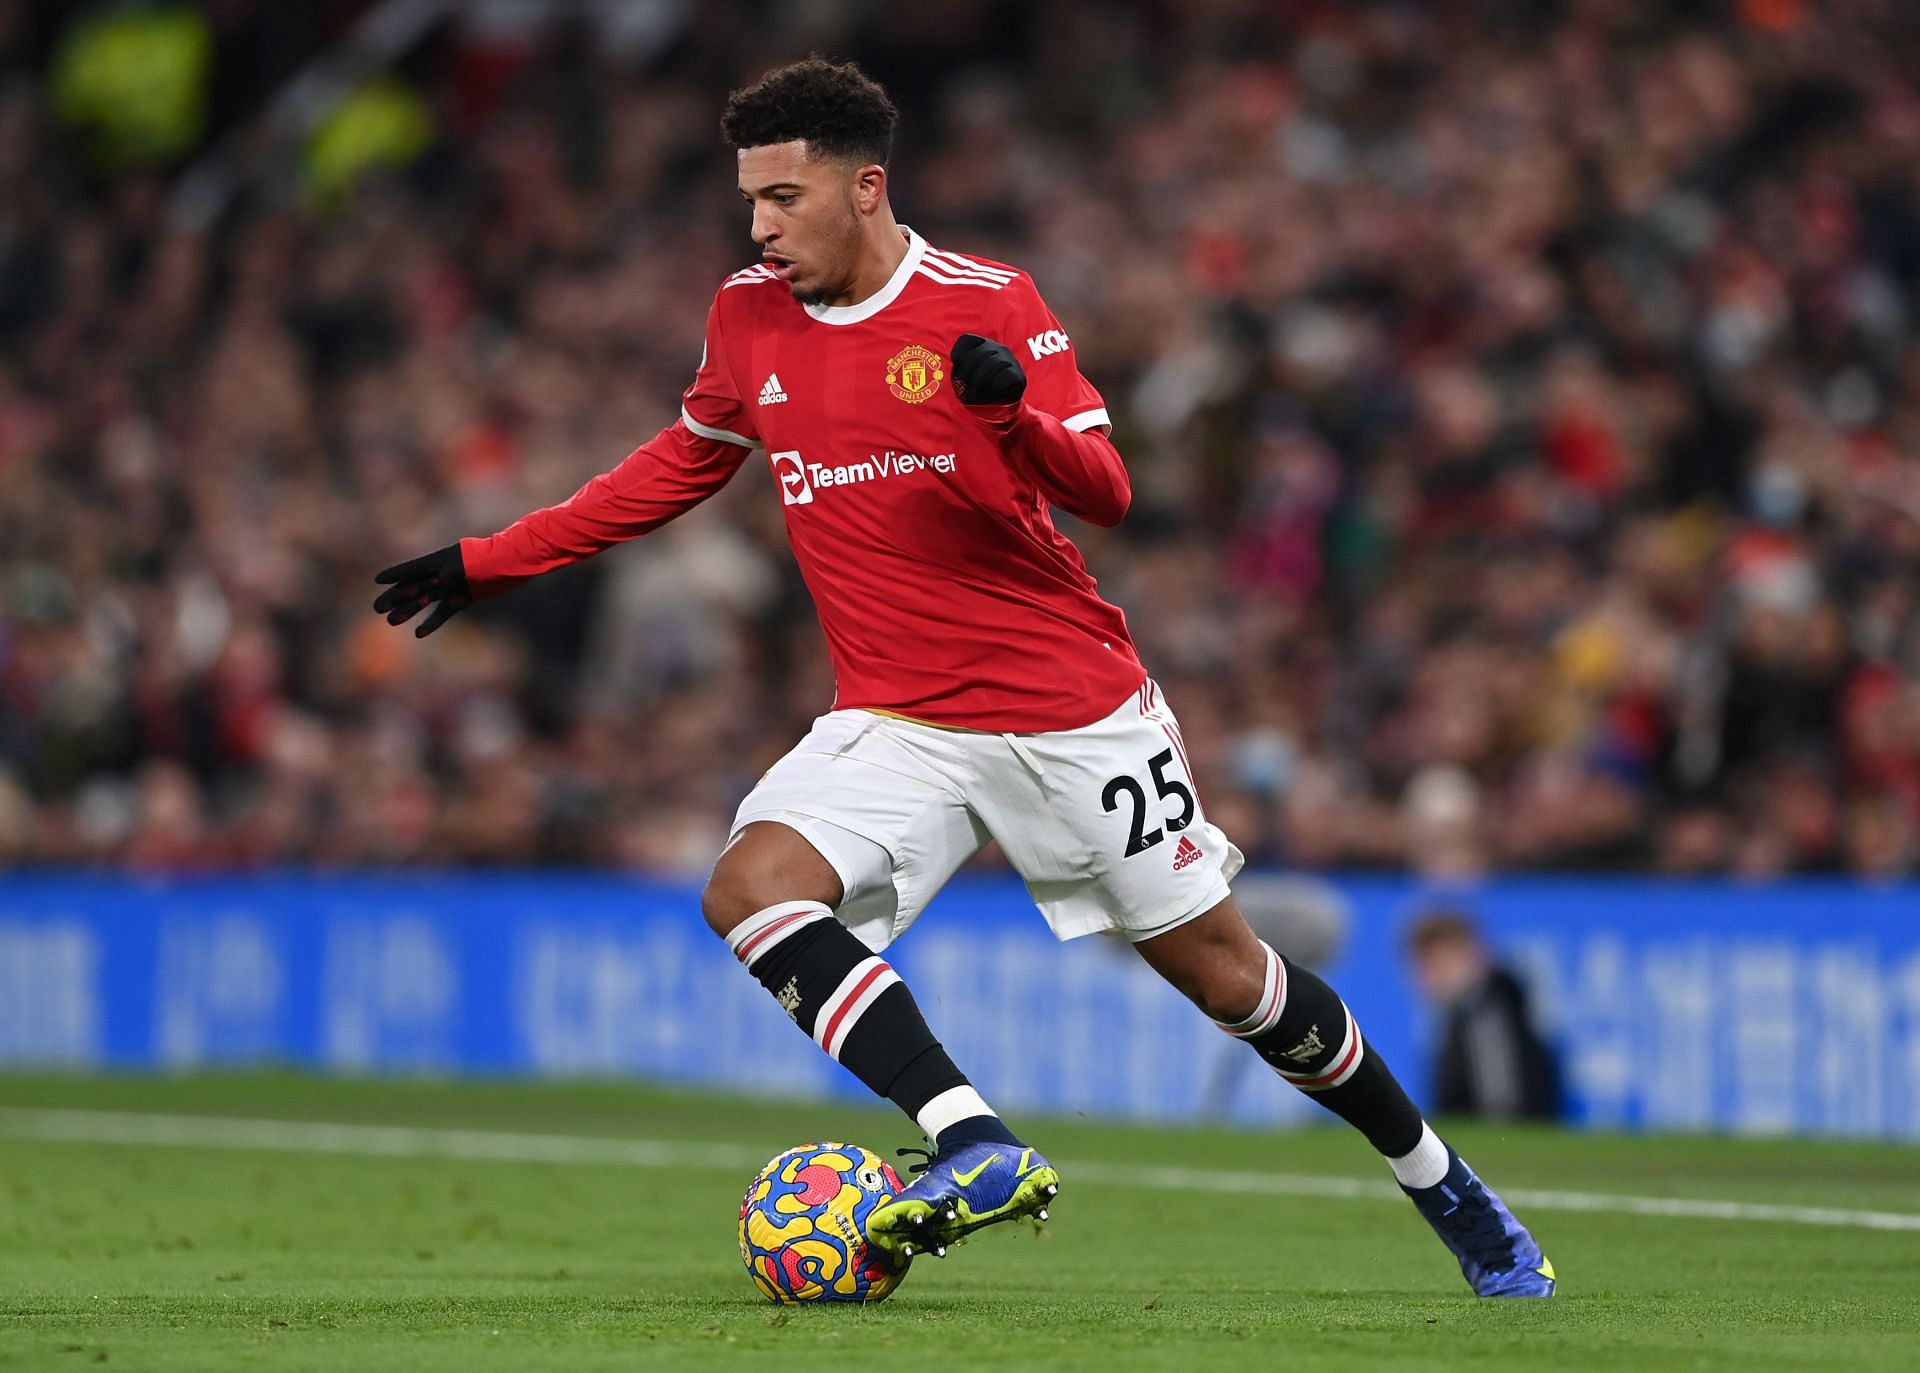 Jadon Sancho has had a quiet start to life at Old Trafford.